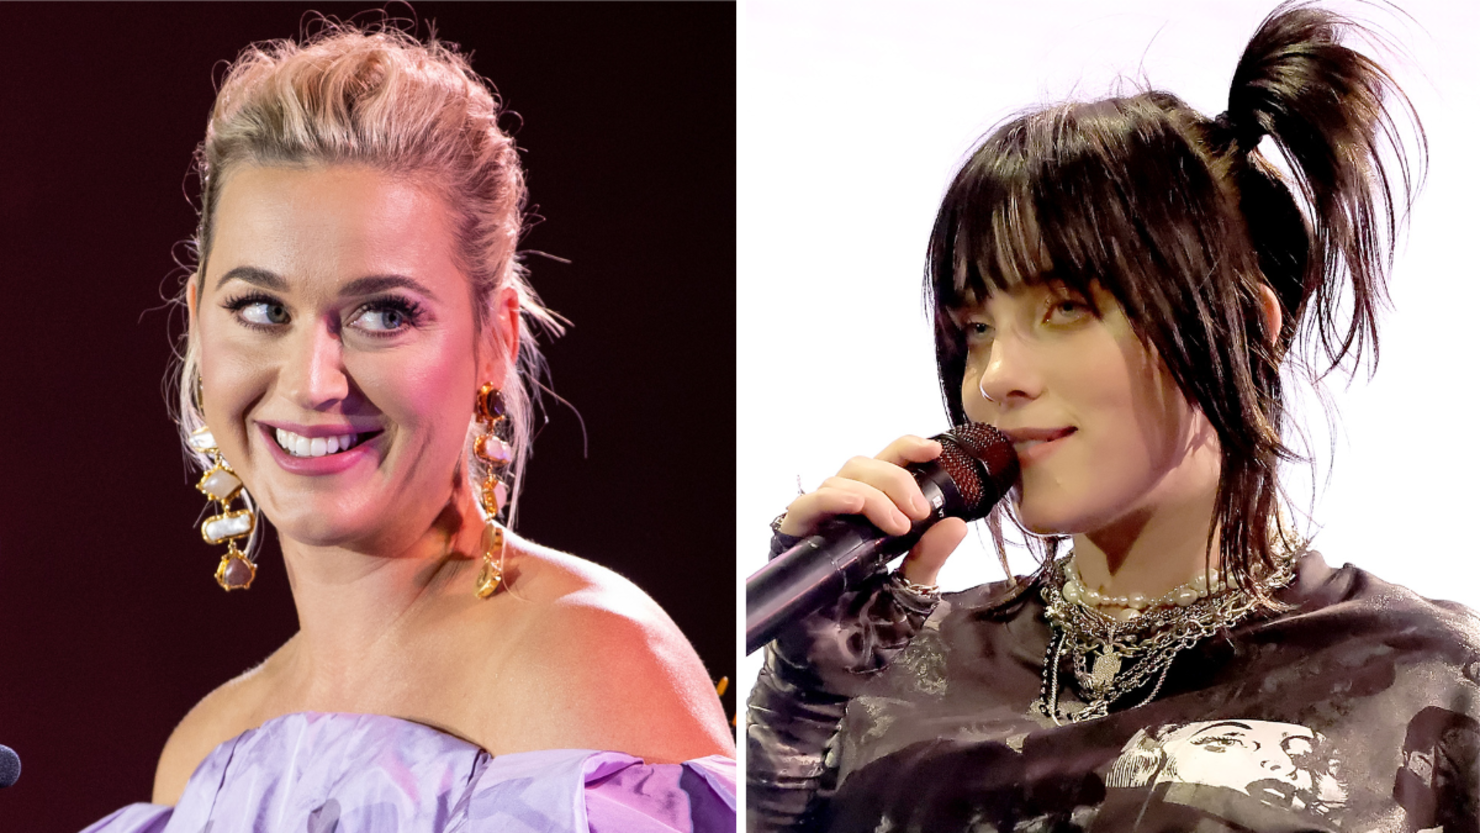 Huge mistake': Katy Perry regrets turning down a Billie Eilish